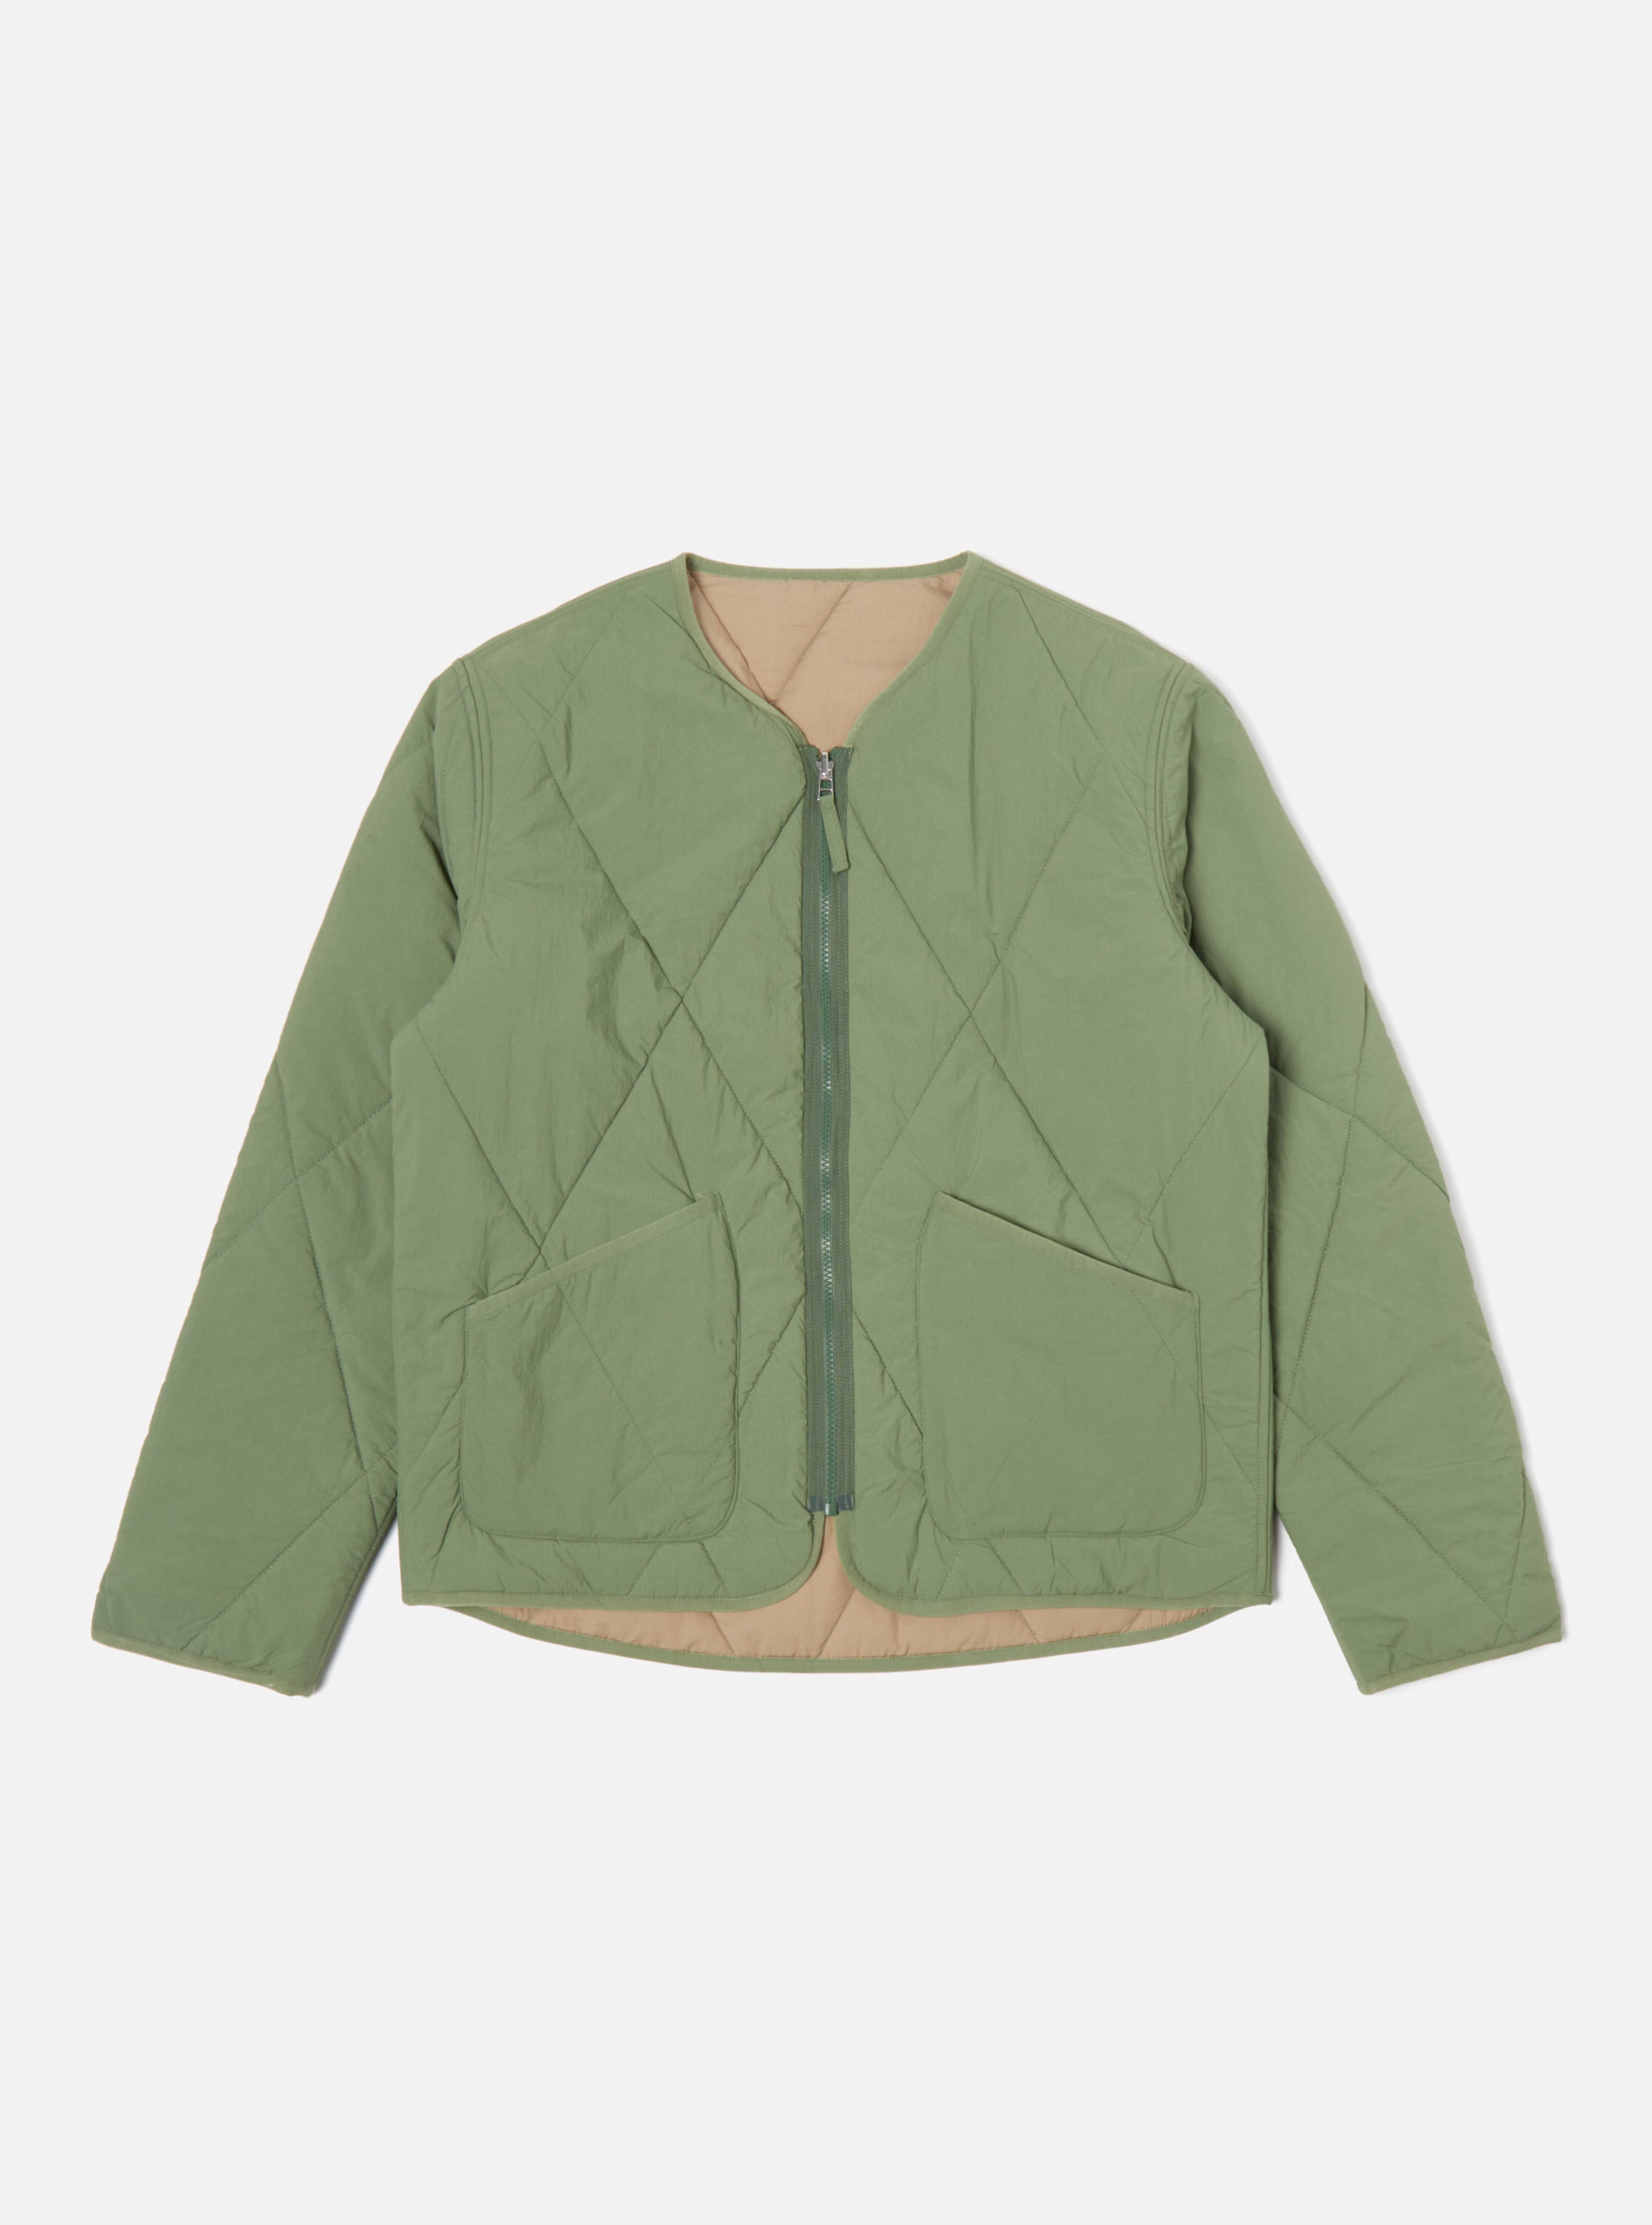 Universal Works Reversible Military Liner Jacket in Green/Sand Diamond